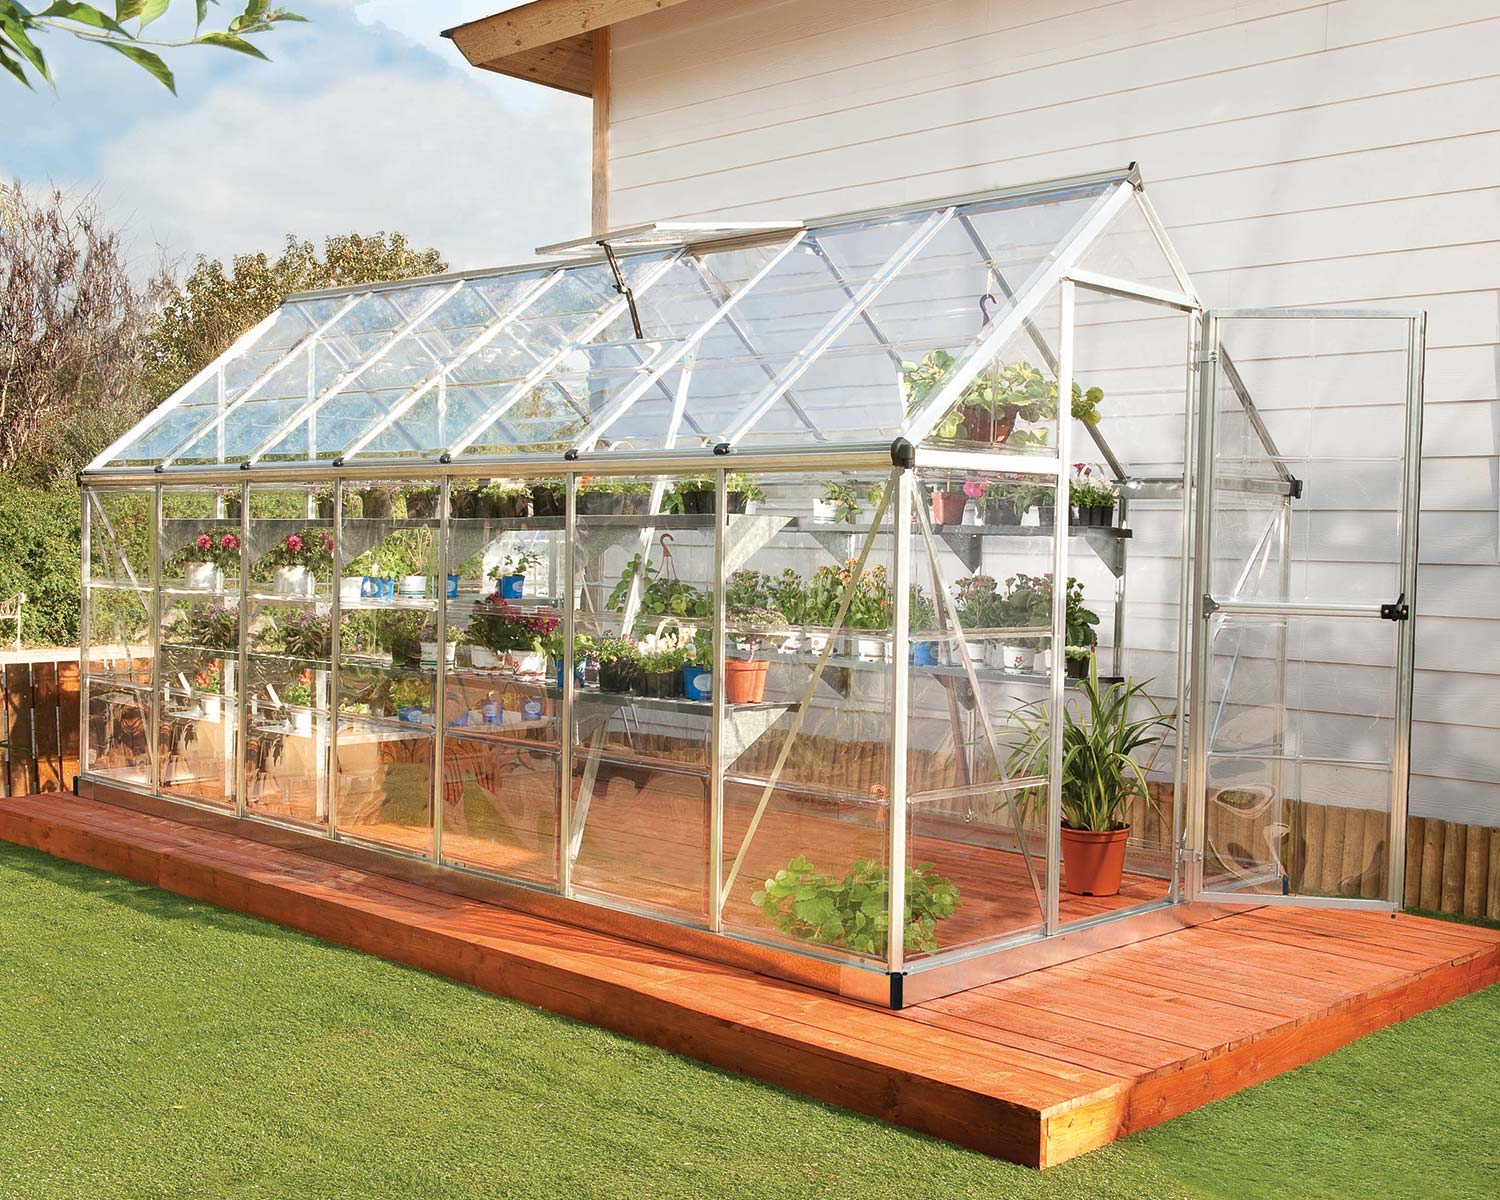 Greenhouse Harmony 6' x 14' Kit - Silver Structure & Clear Glazing